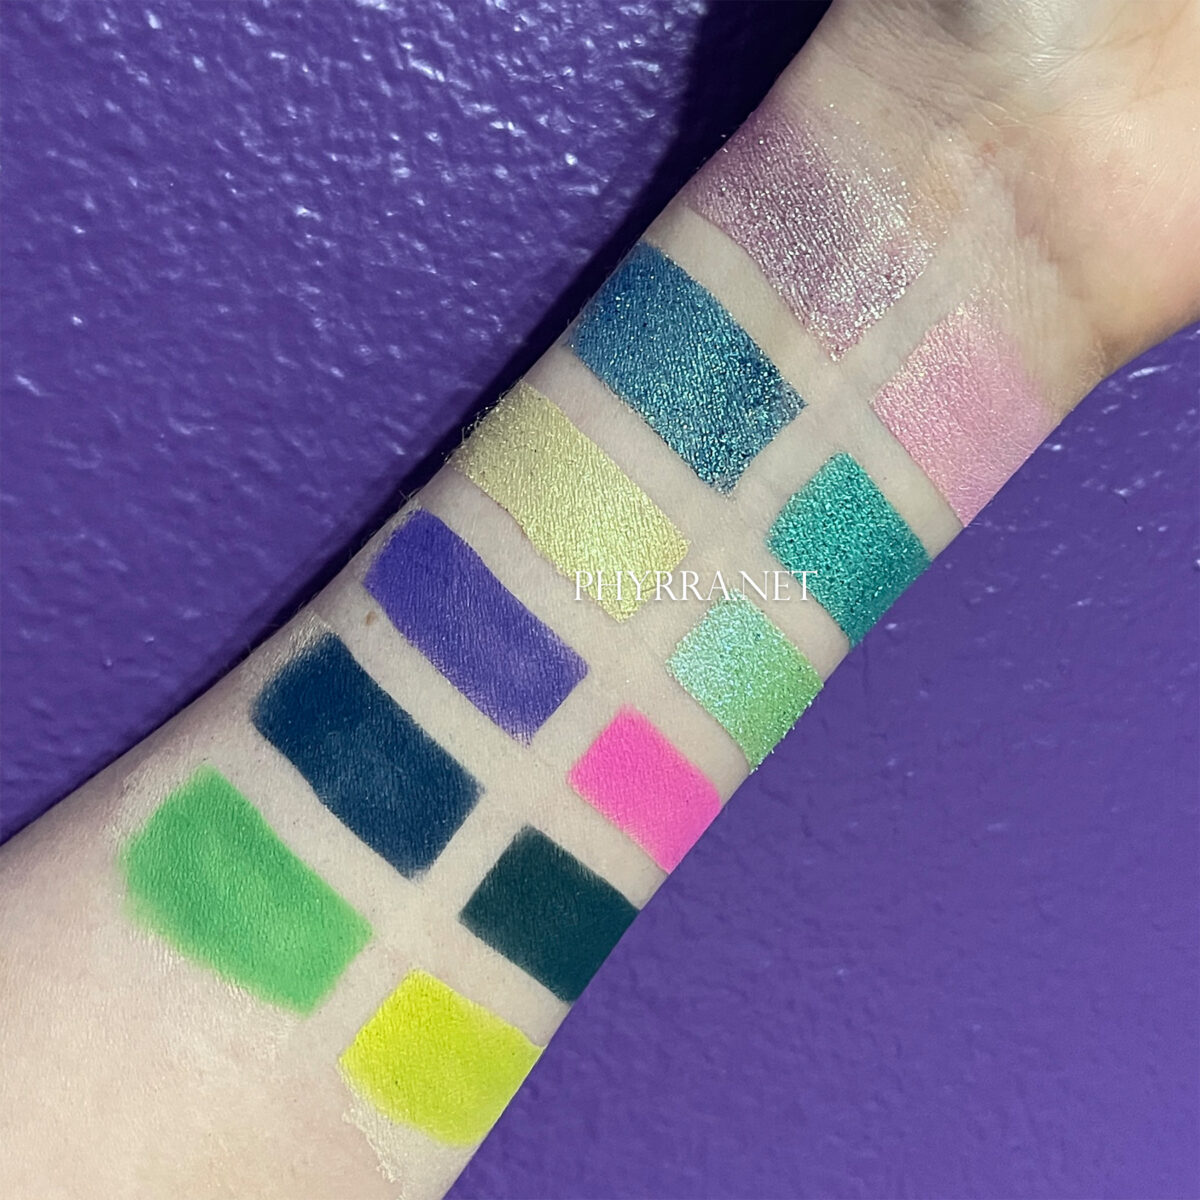 Artificial Lighting Swatches of Lethal Cosmetics 1UP Palette